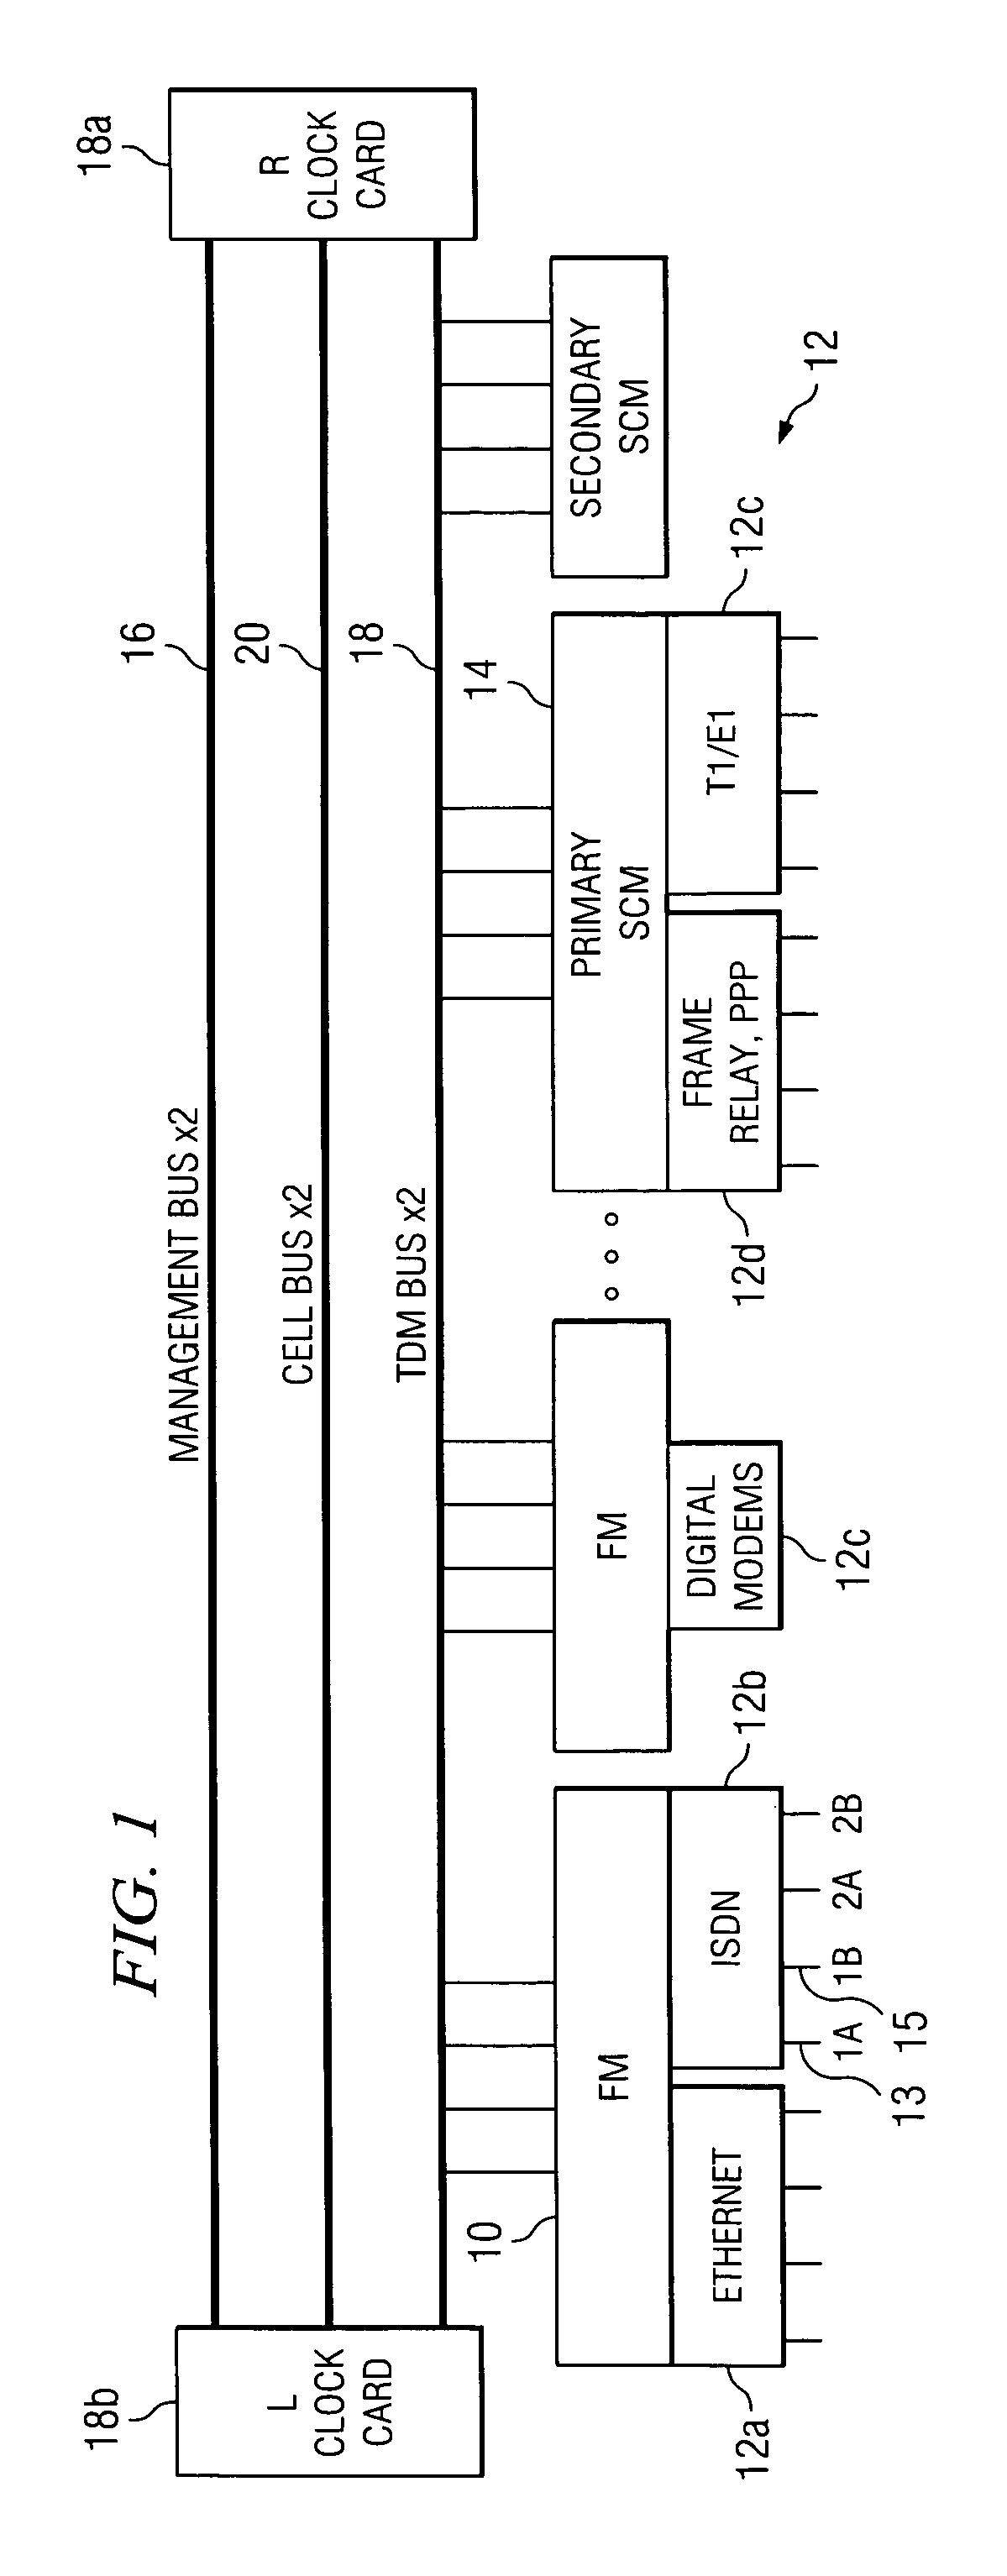 Multi-service network switch with quality of access